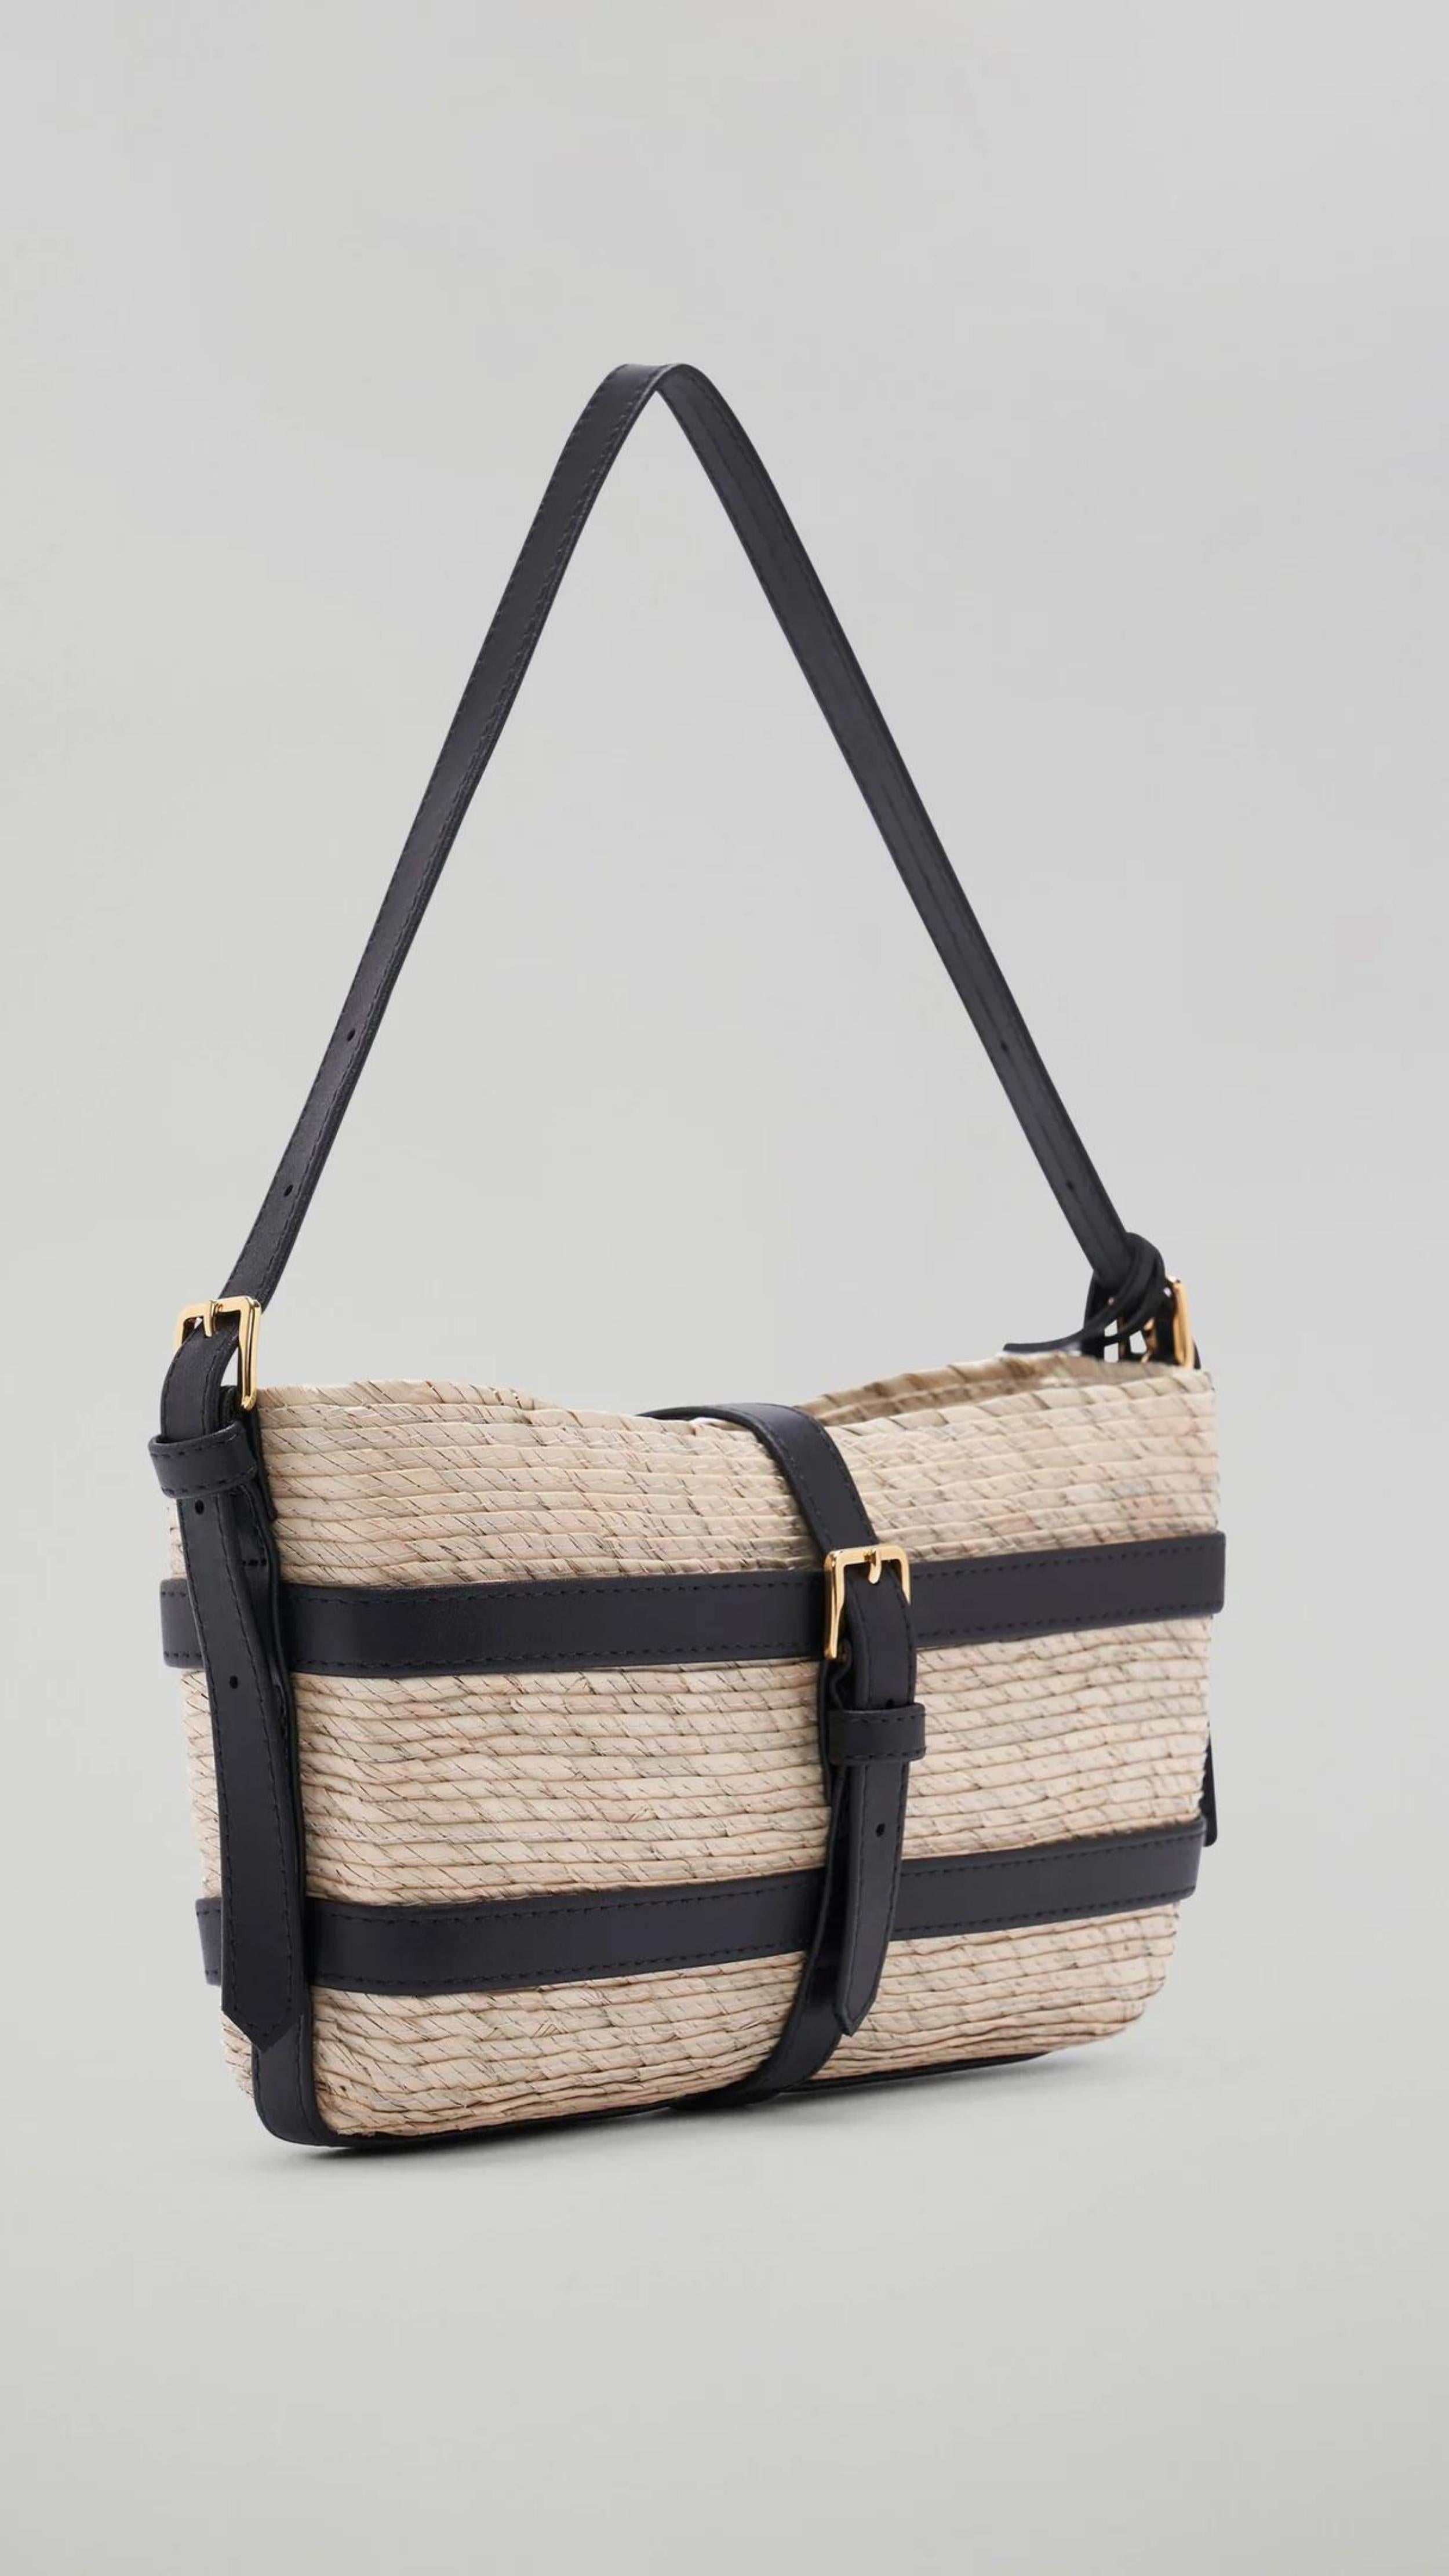 Altuzarra Watermill Shoulder Bag in Natural and Black. Summer raffia clutch with adjustable leather straps. Natural raffia color with black leather detailing and gold hardware. This is a summer purse. Shown facing front view. Available with Experience 27 in Madrid Spain